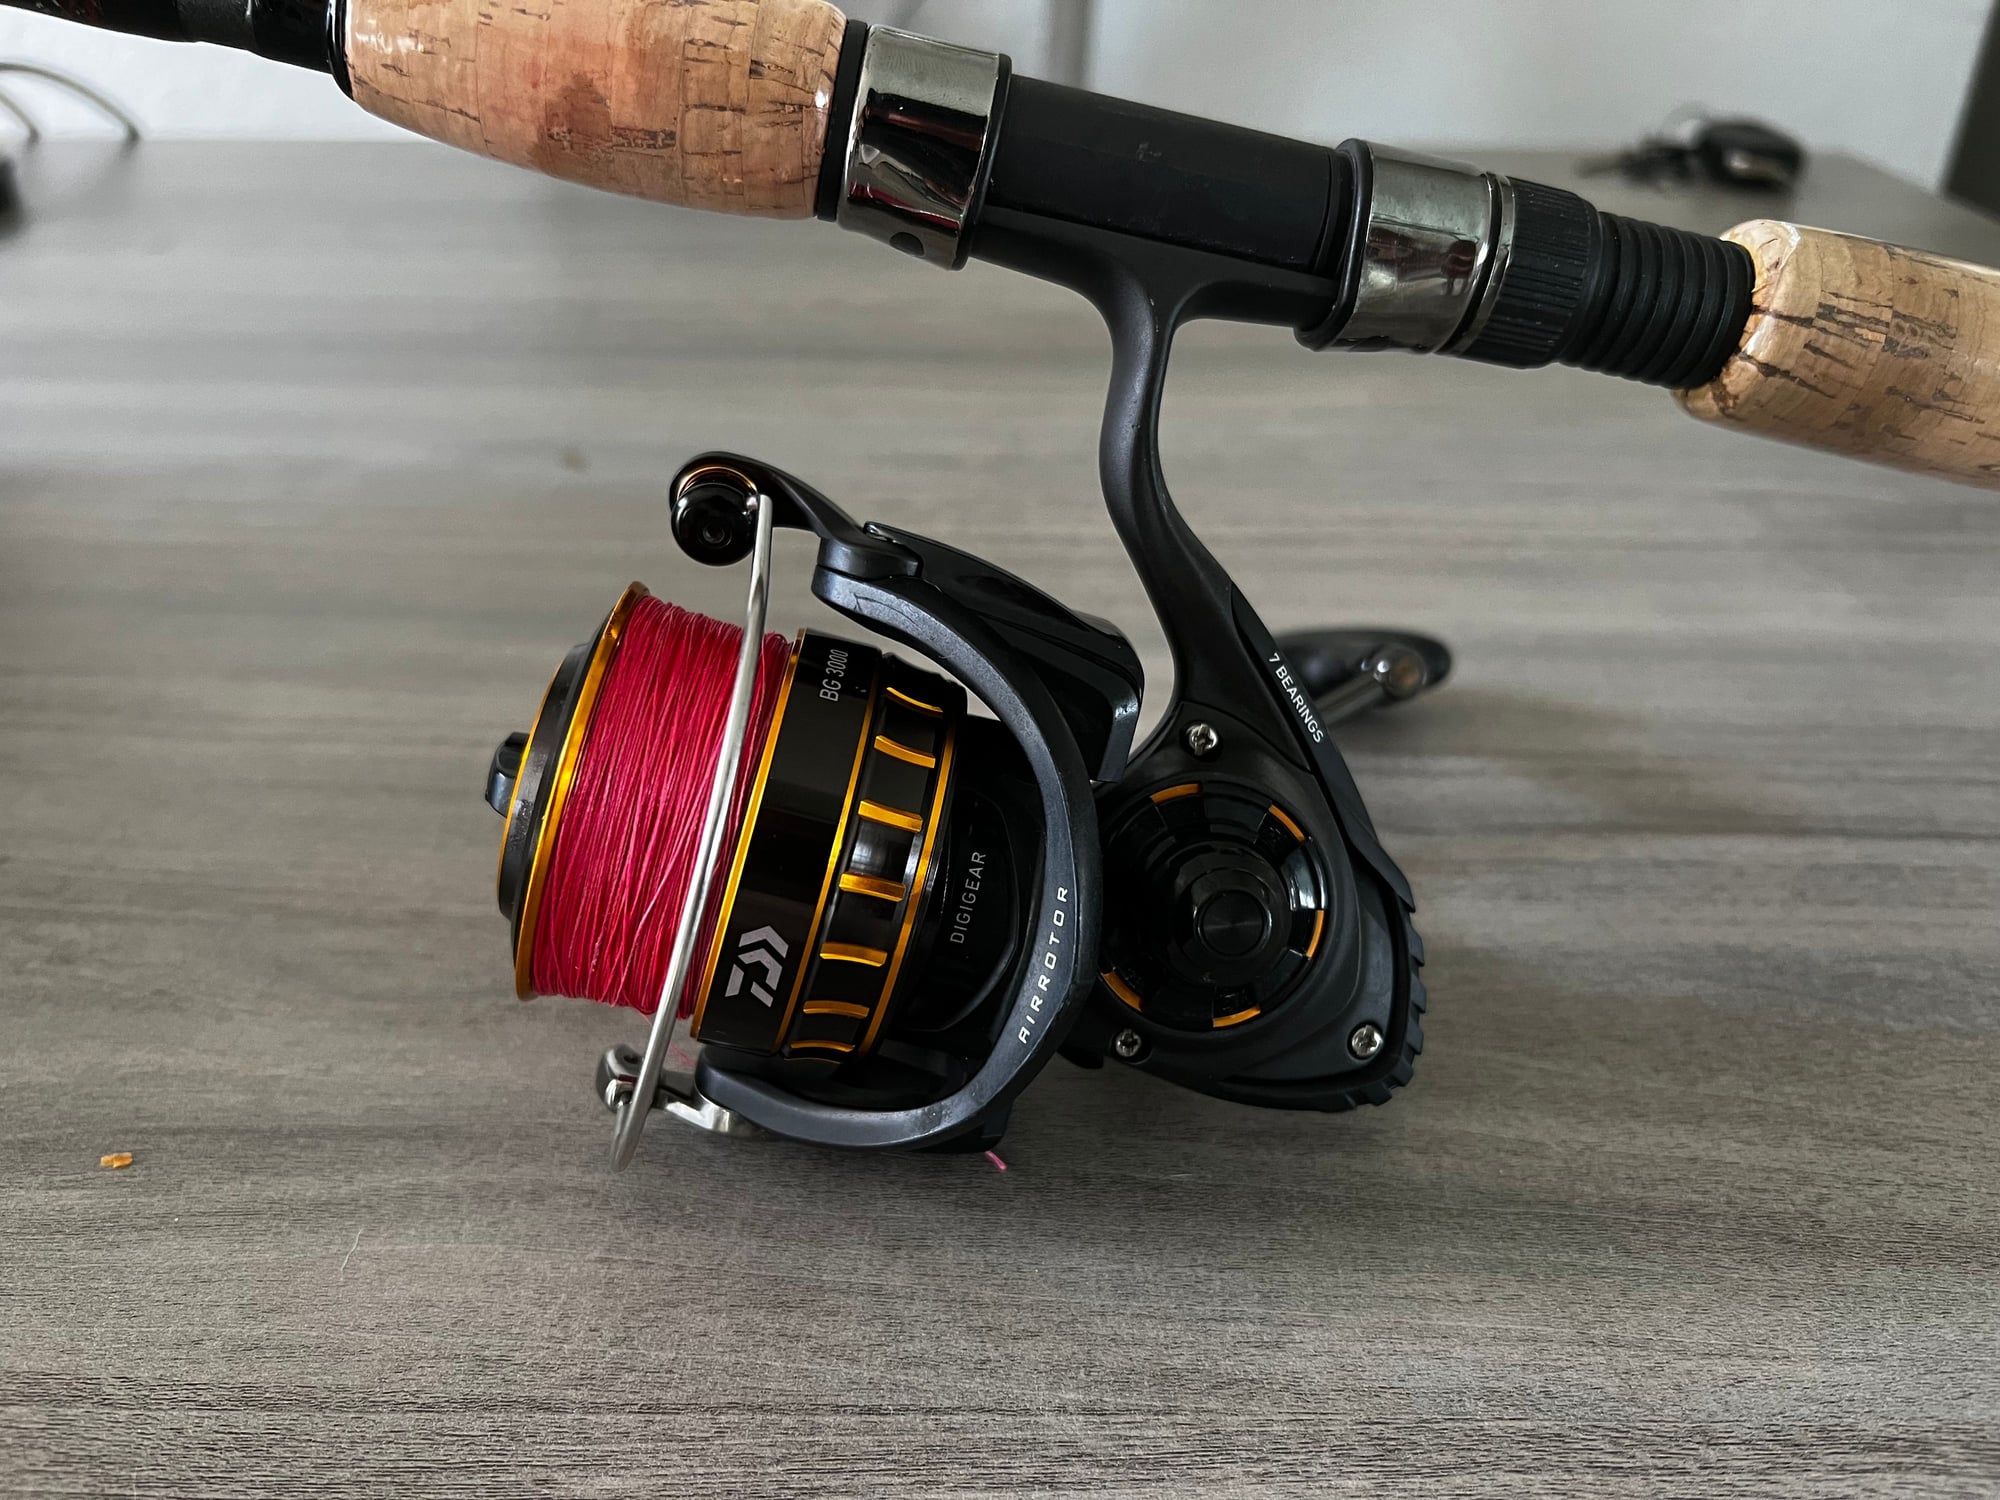 Daiwa BG 3000 for sale - The Hull Truth - Boating and Fishing Forum